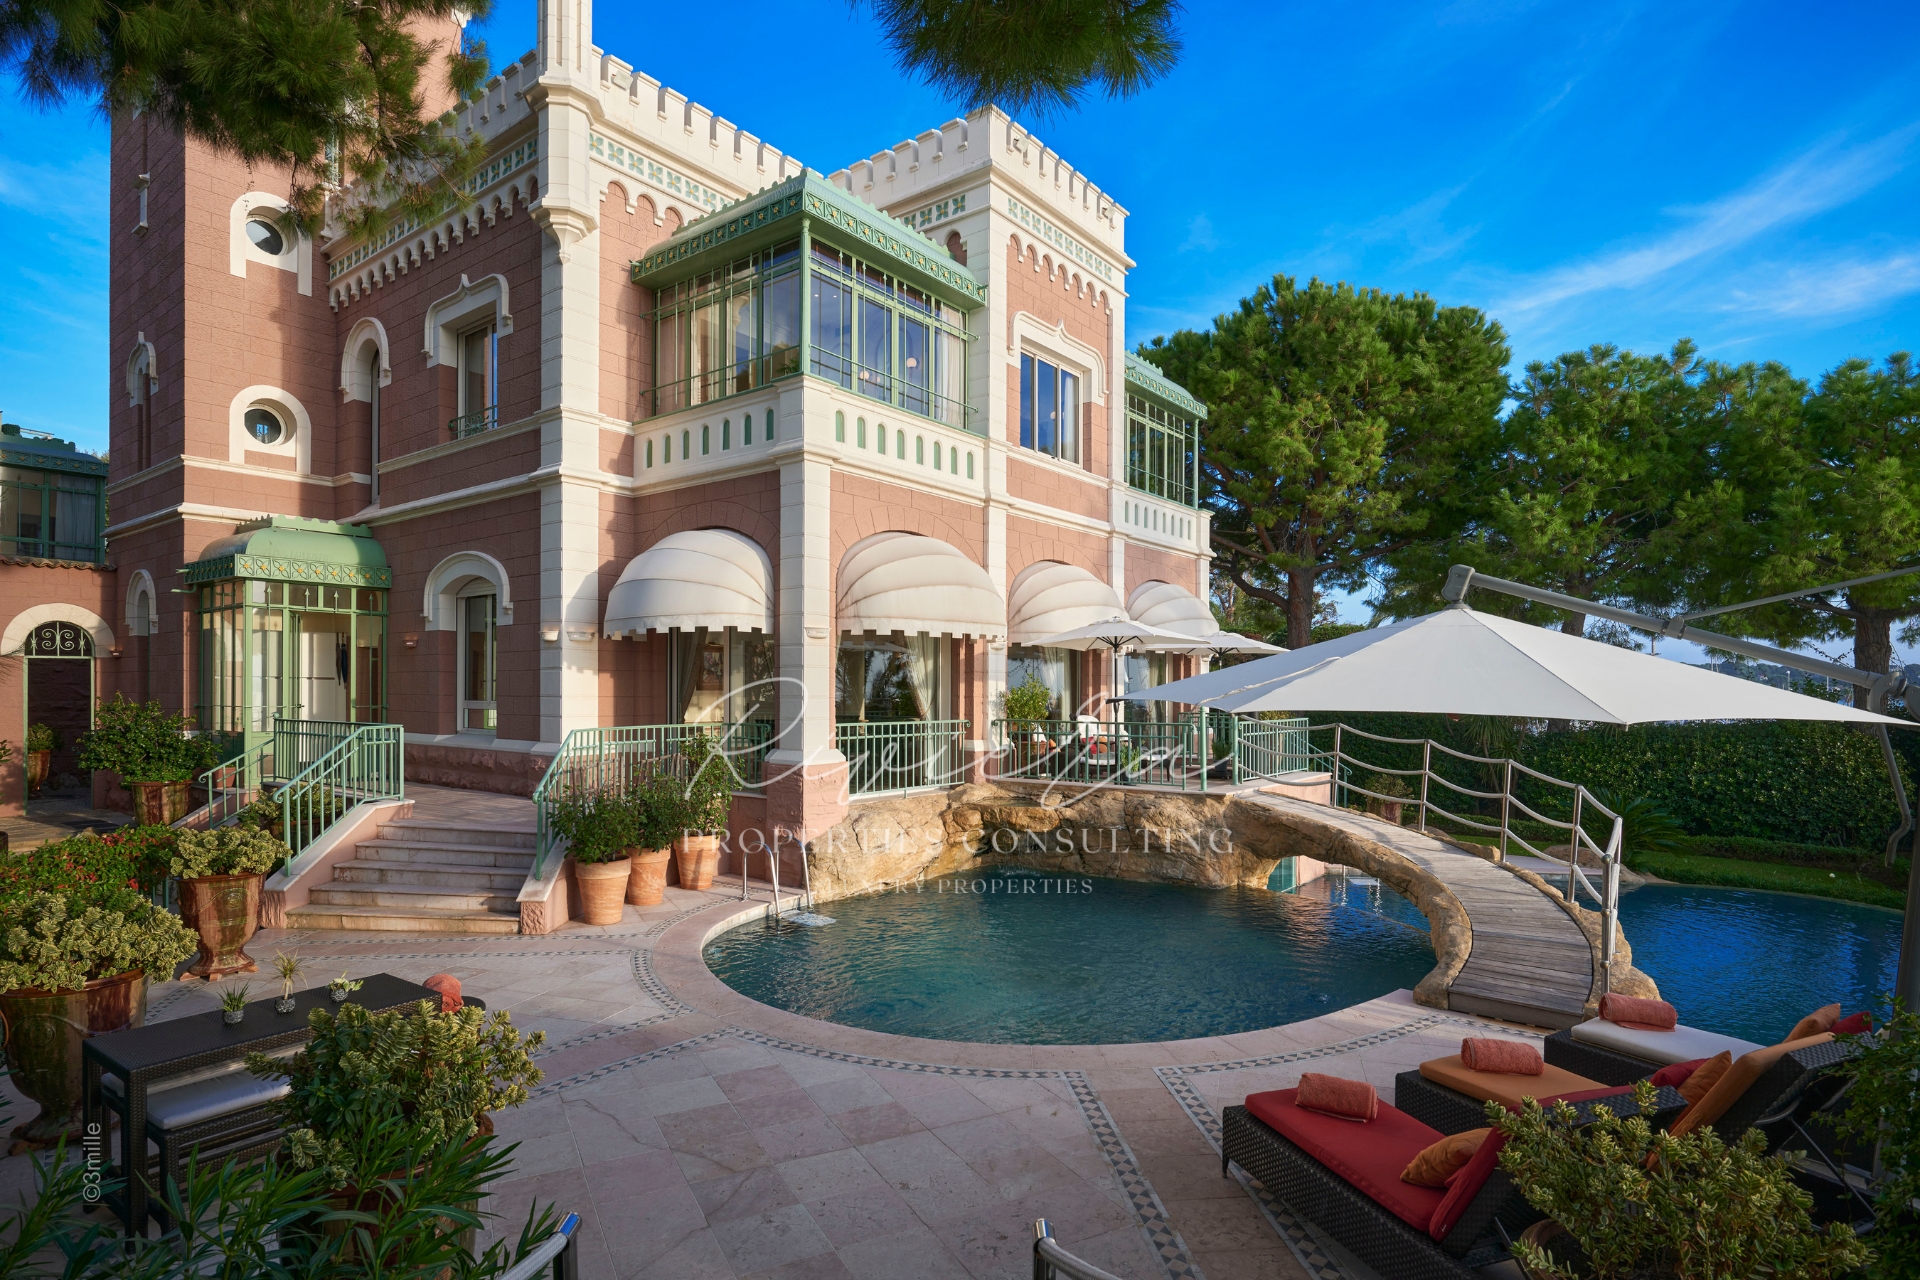 Waterfront property - Cap d'Antibes - real estate